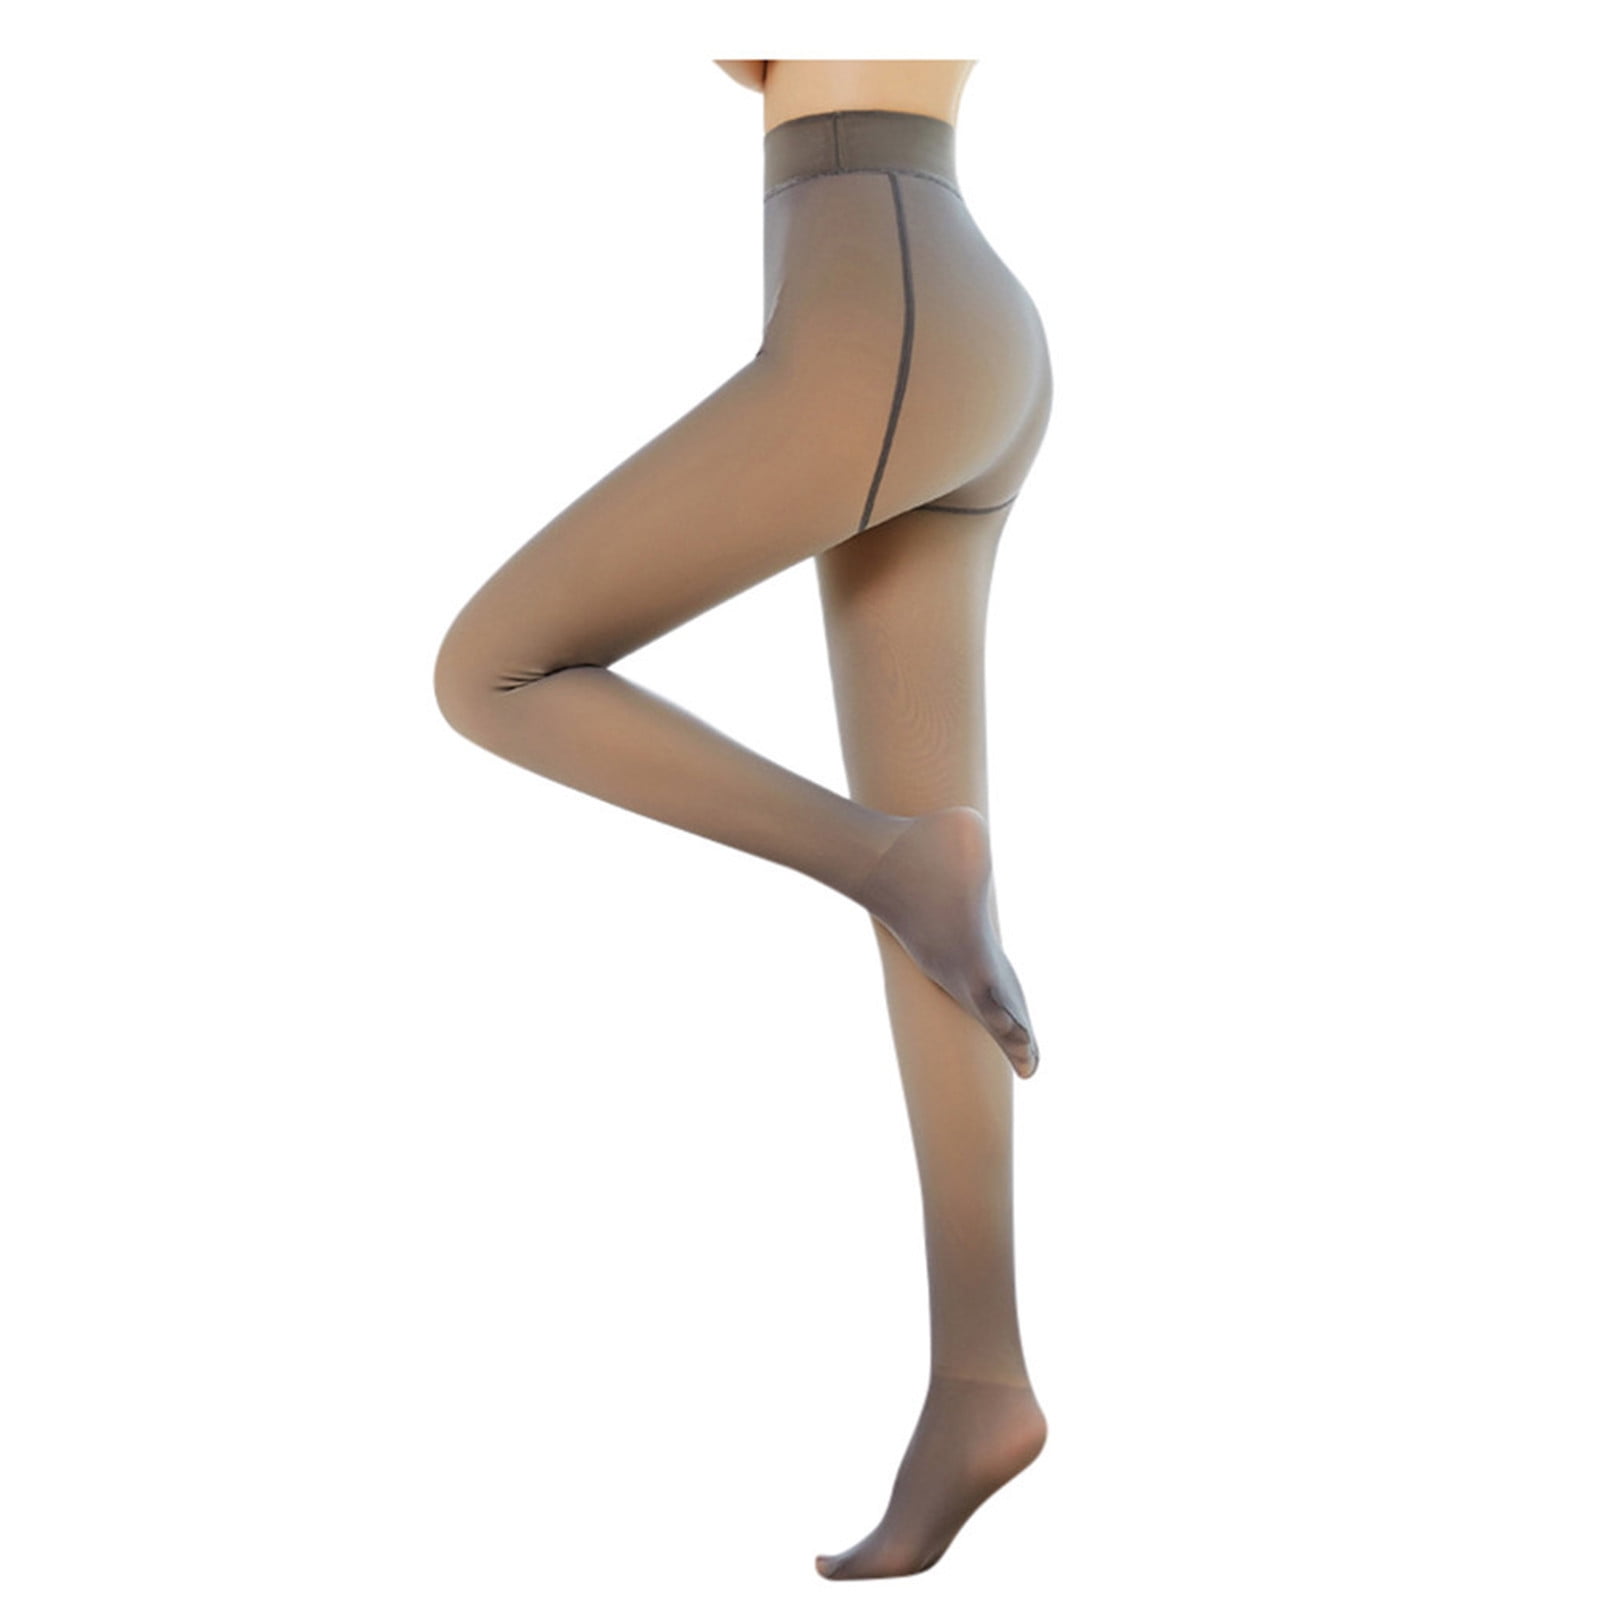 Winter Womens High Waist Thermal Pantyhose Sexy Elastic Shaper Origin Sale  Pants For Slimming And Comfort X0521 From Musuo03, $12.77